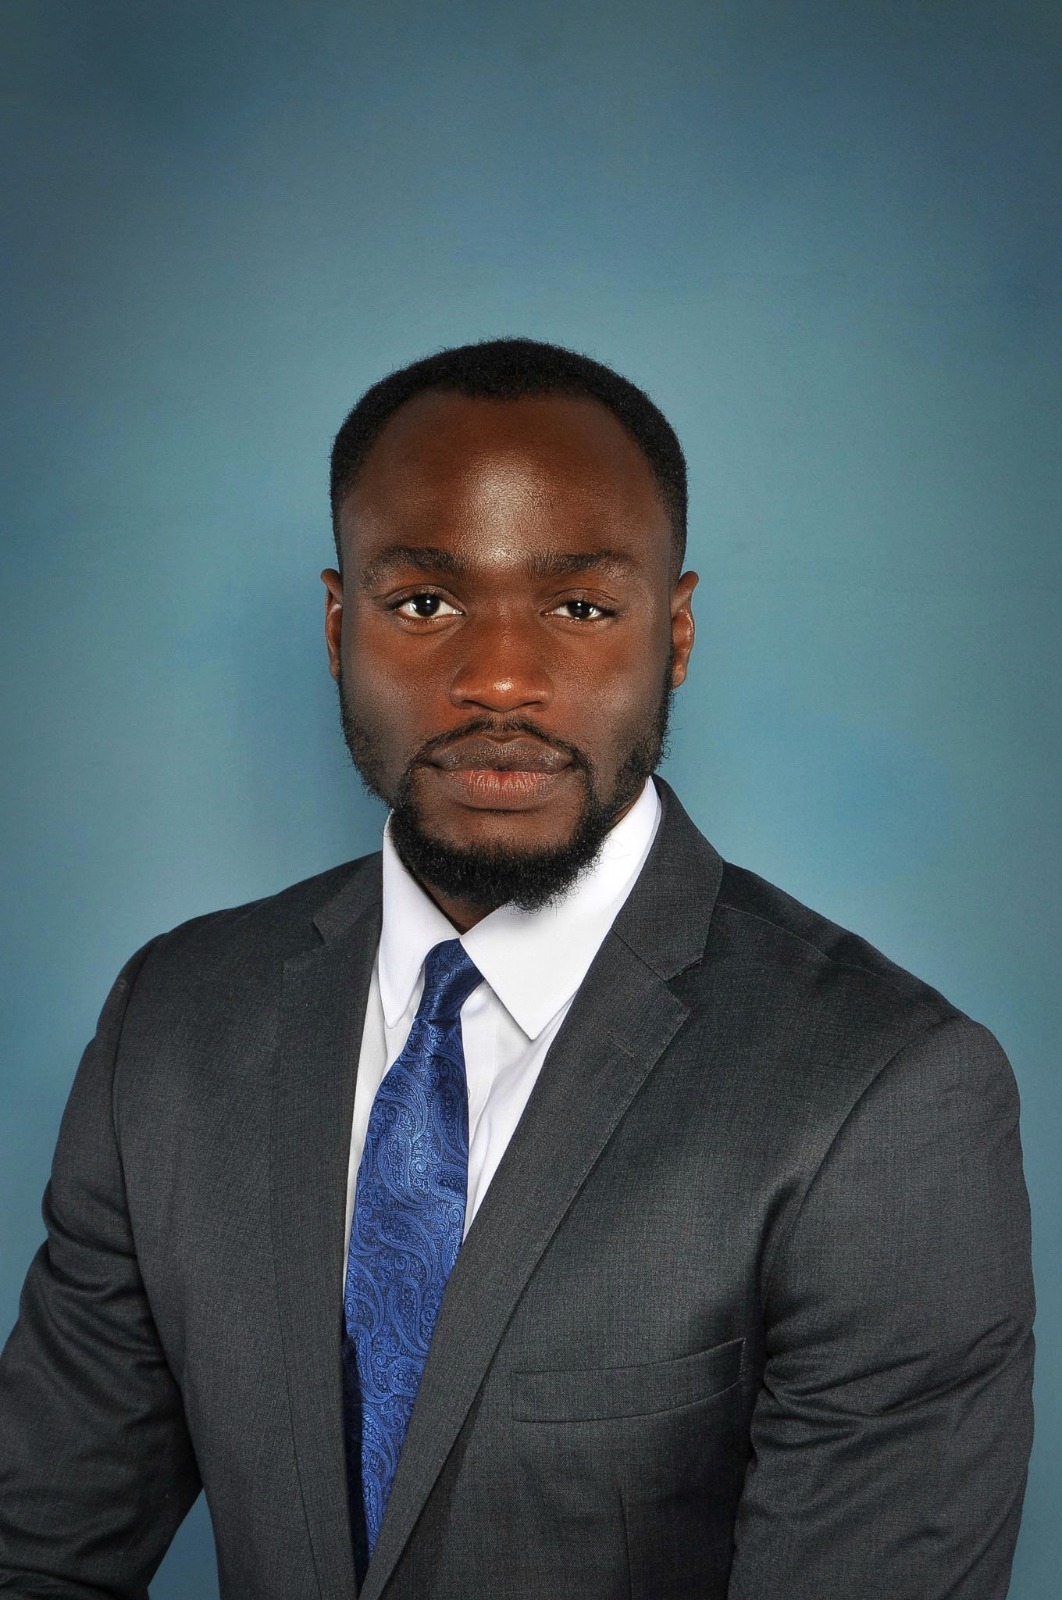 Nigeria’s Jake Okechukwu Effoduh, appointed Assistant Professor at Top Canadian Law School